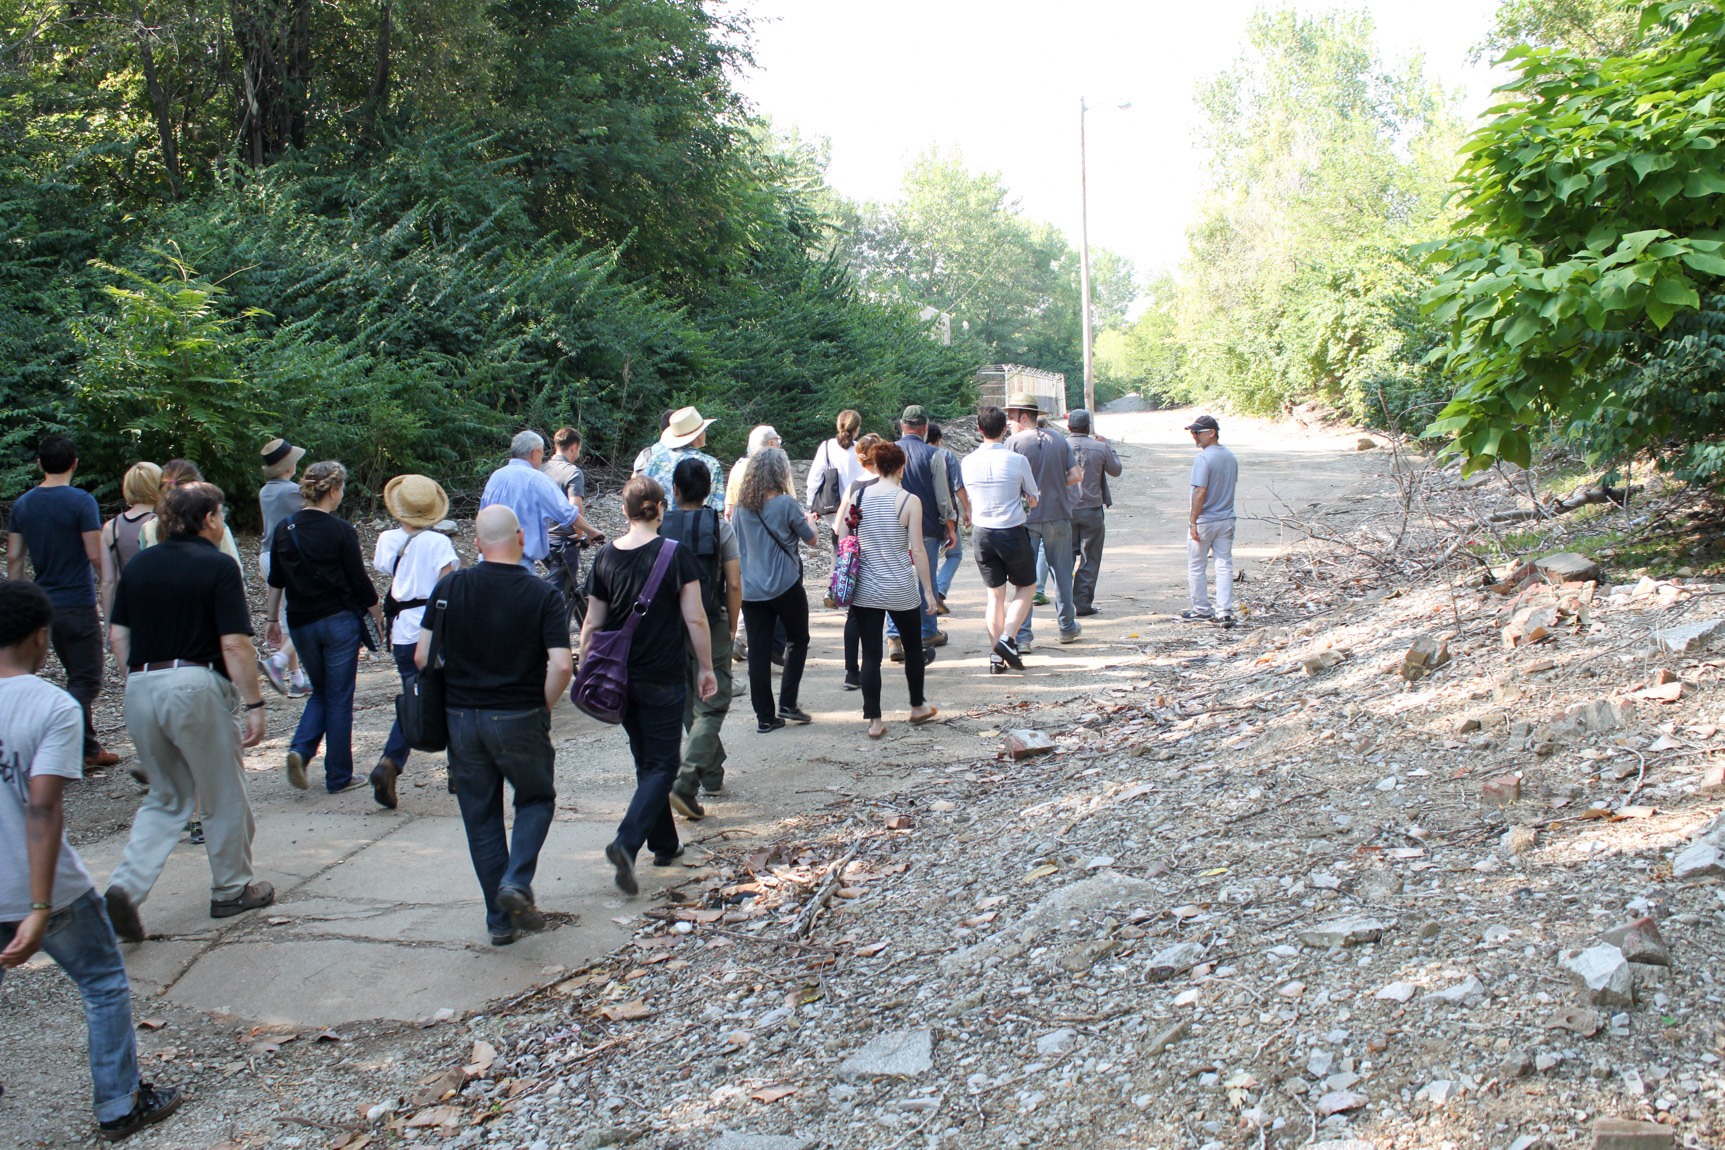 A large group walks together on a vacant street in a forested area.